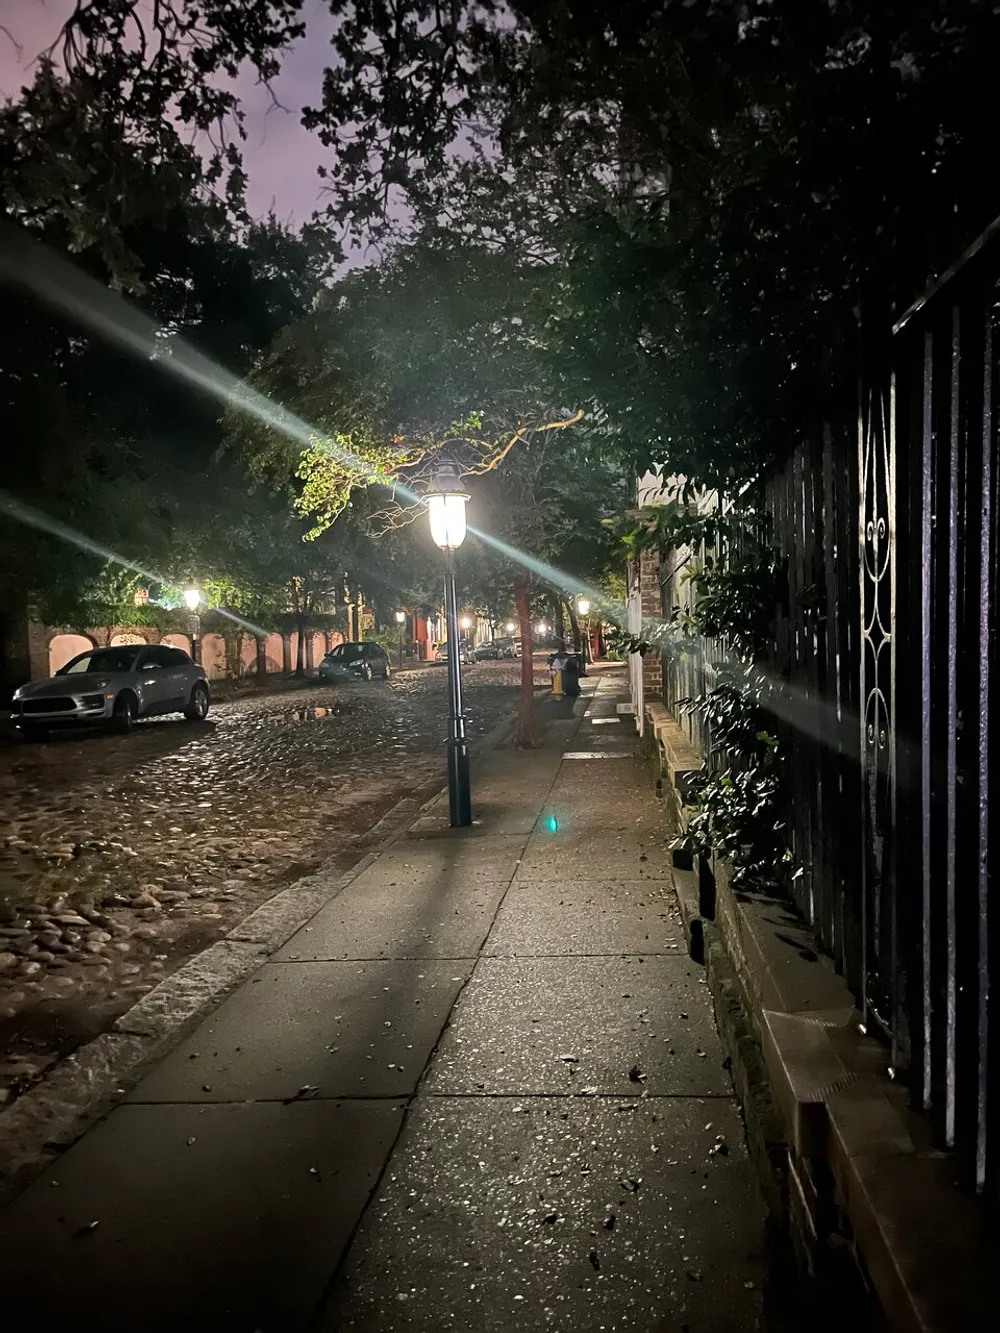 An illuminated streetlight casts a warm glow on a cobblestone-lined sidewalk at dusk creating an atmospheric and serene urban scene